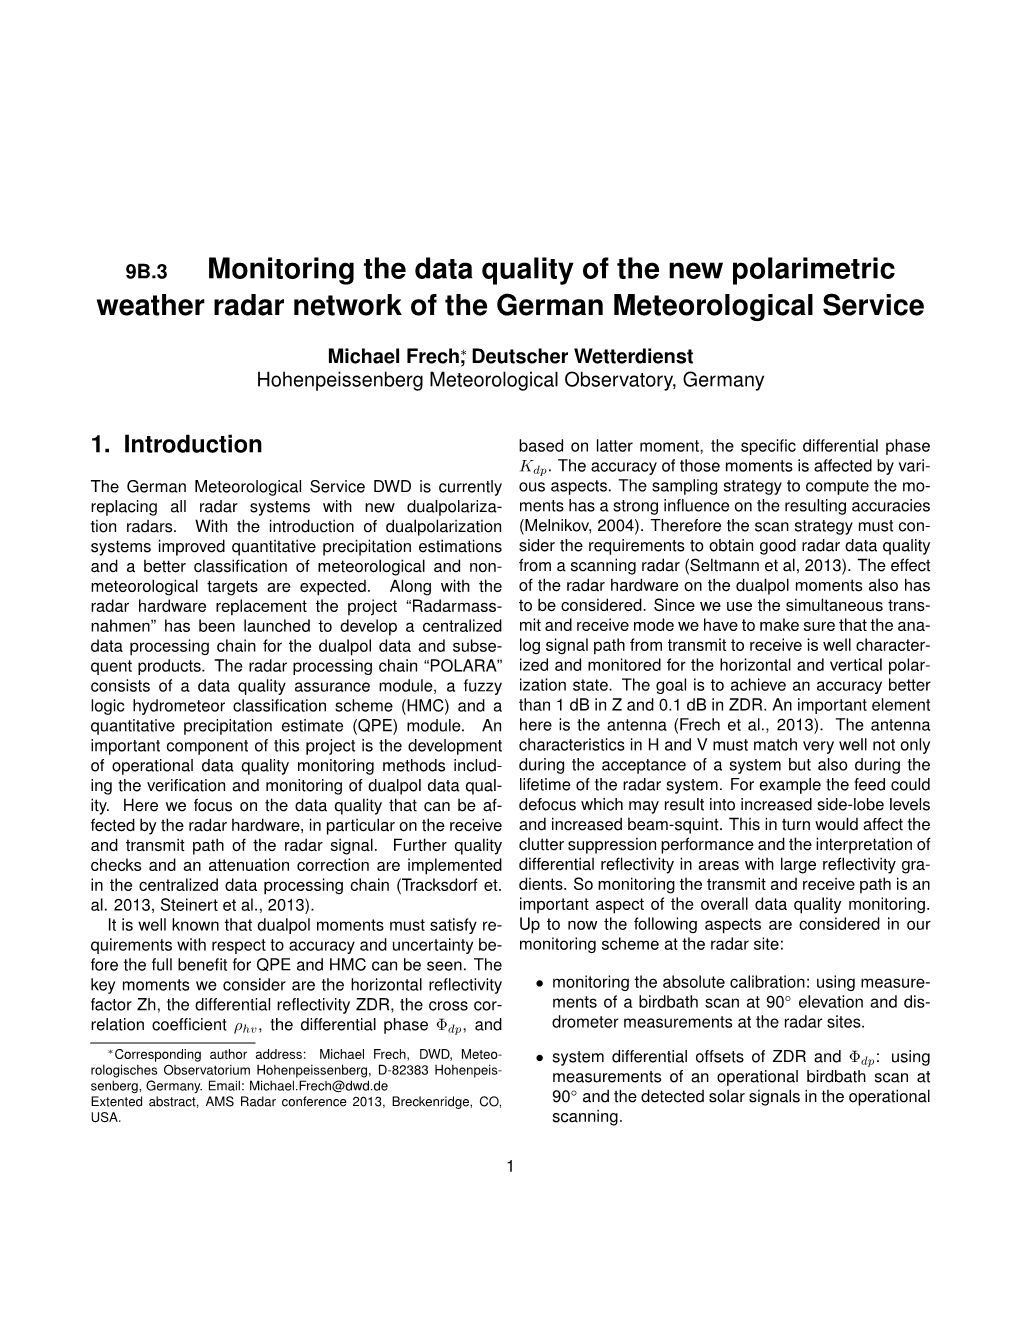 Monitoring the Data Quality of the New Polarimetric Weather Radar Network of the German Meteorological Service